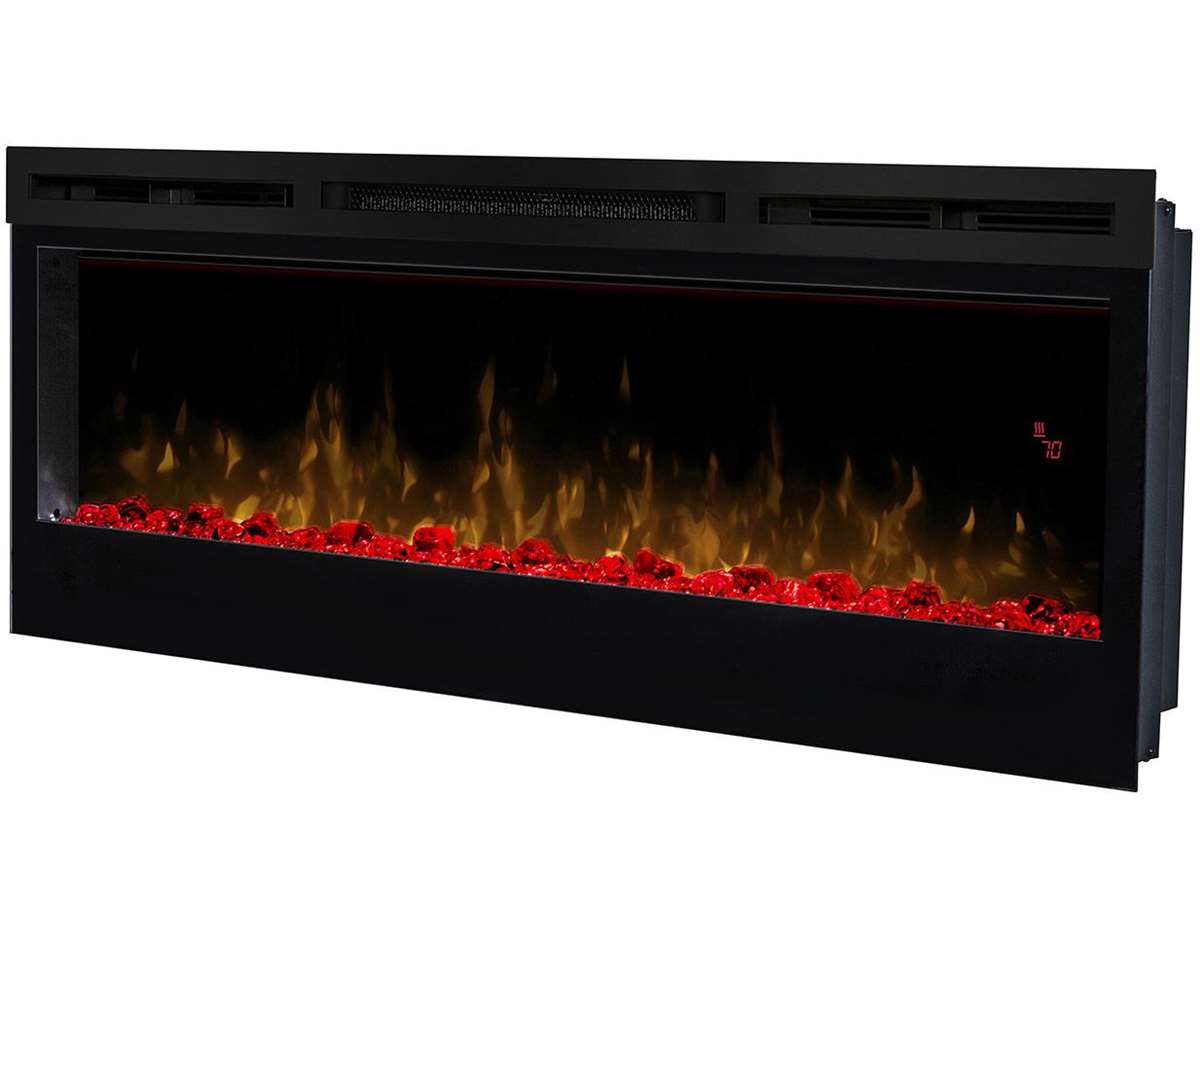 Prism modern electric fireplace in 50" width.